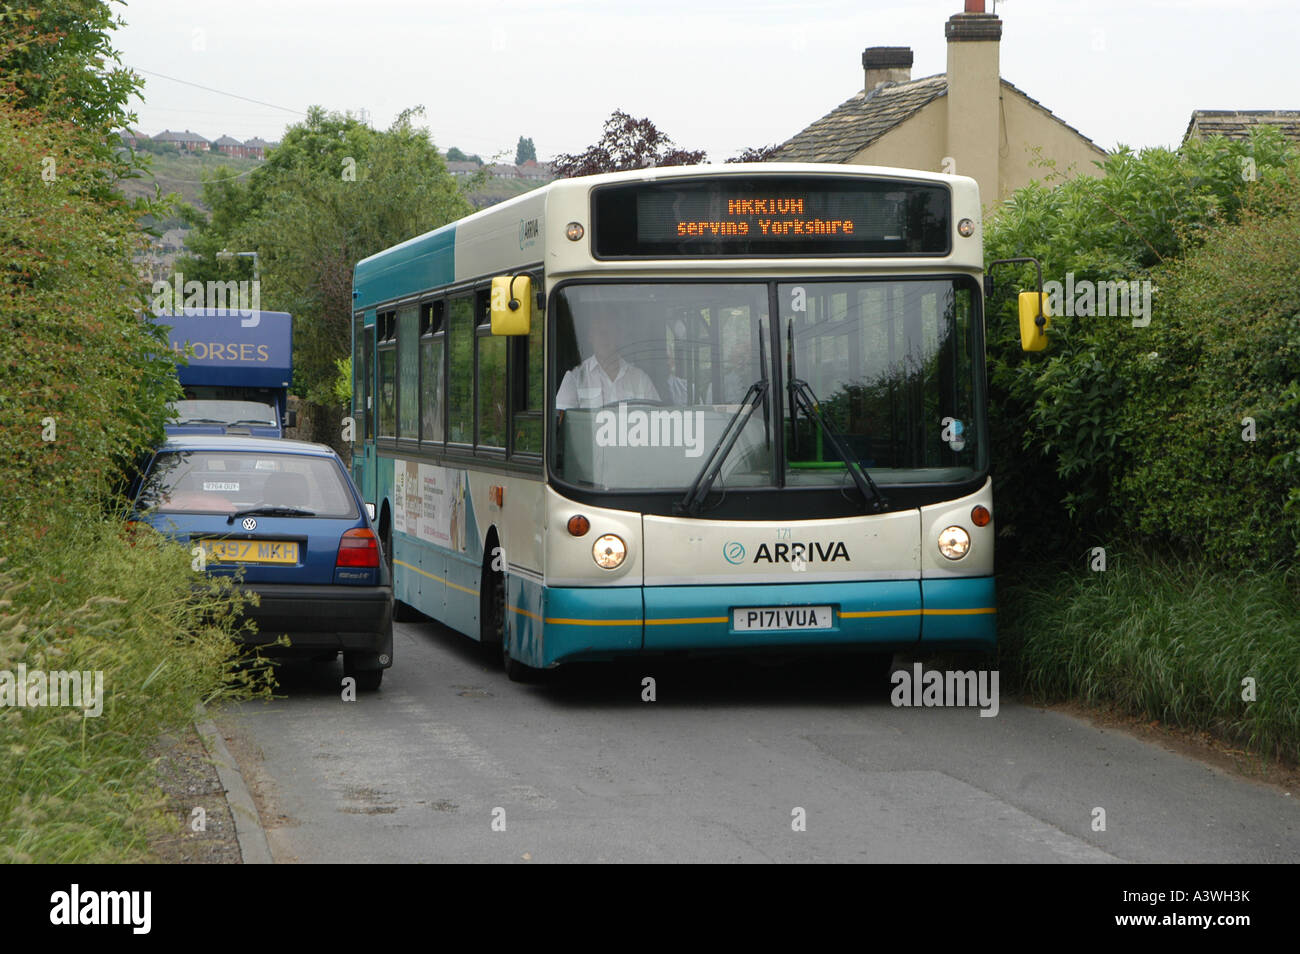 Single decker arriva bus on a rural route in Yorkshire England Stock Photo